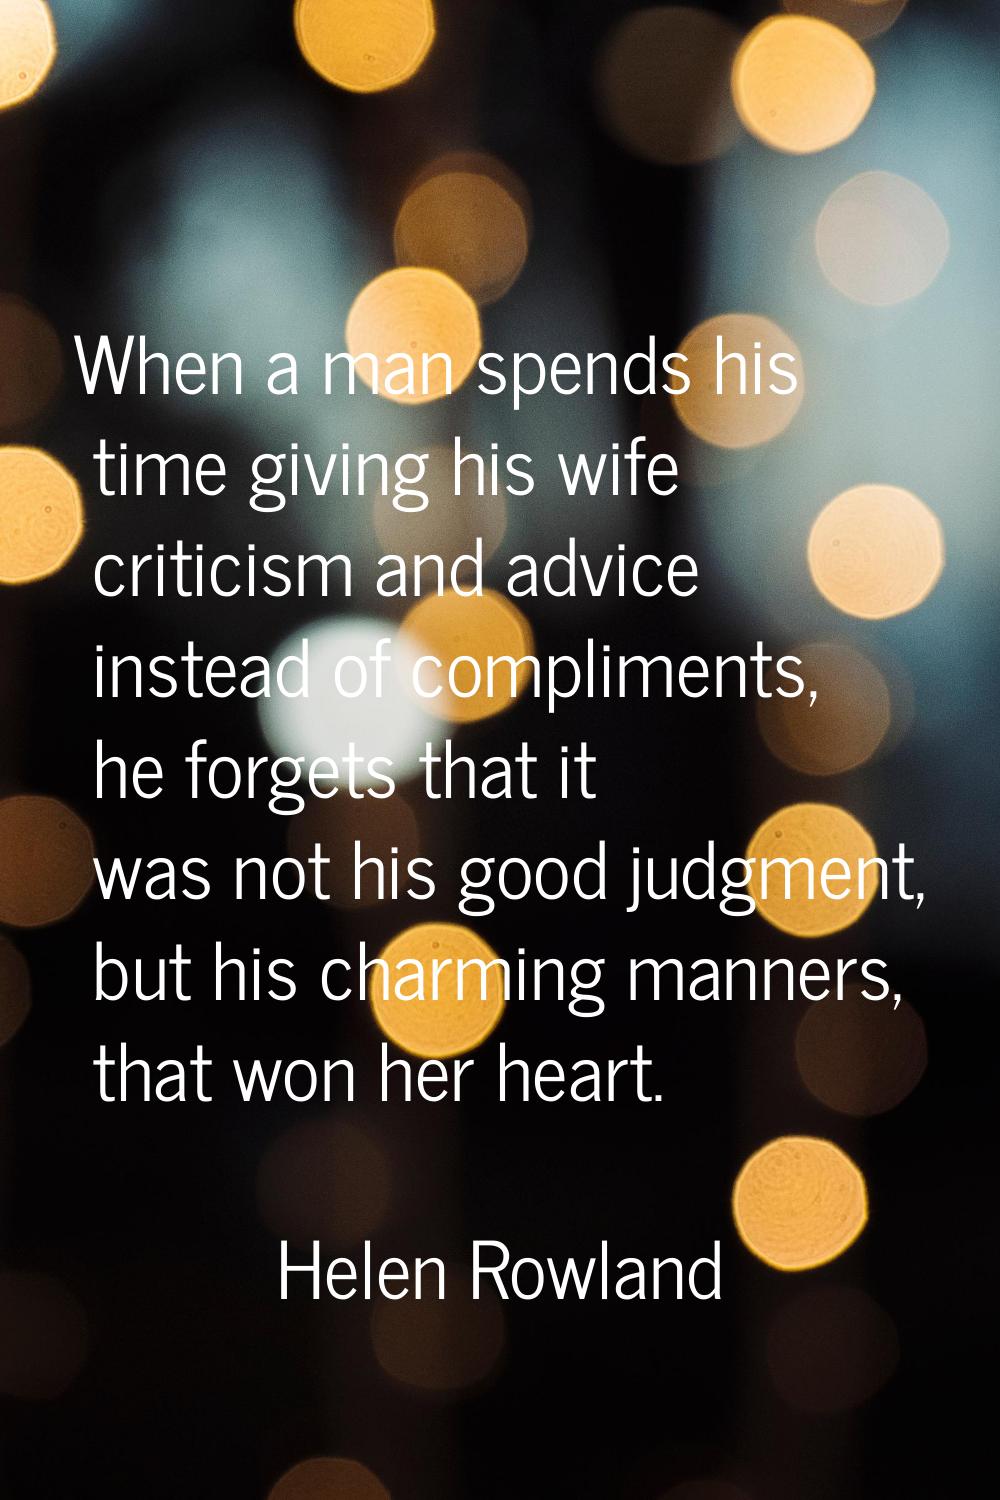 When a man spends his time giving his wife criticism and advice instead of compliments, he forgets 